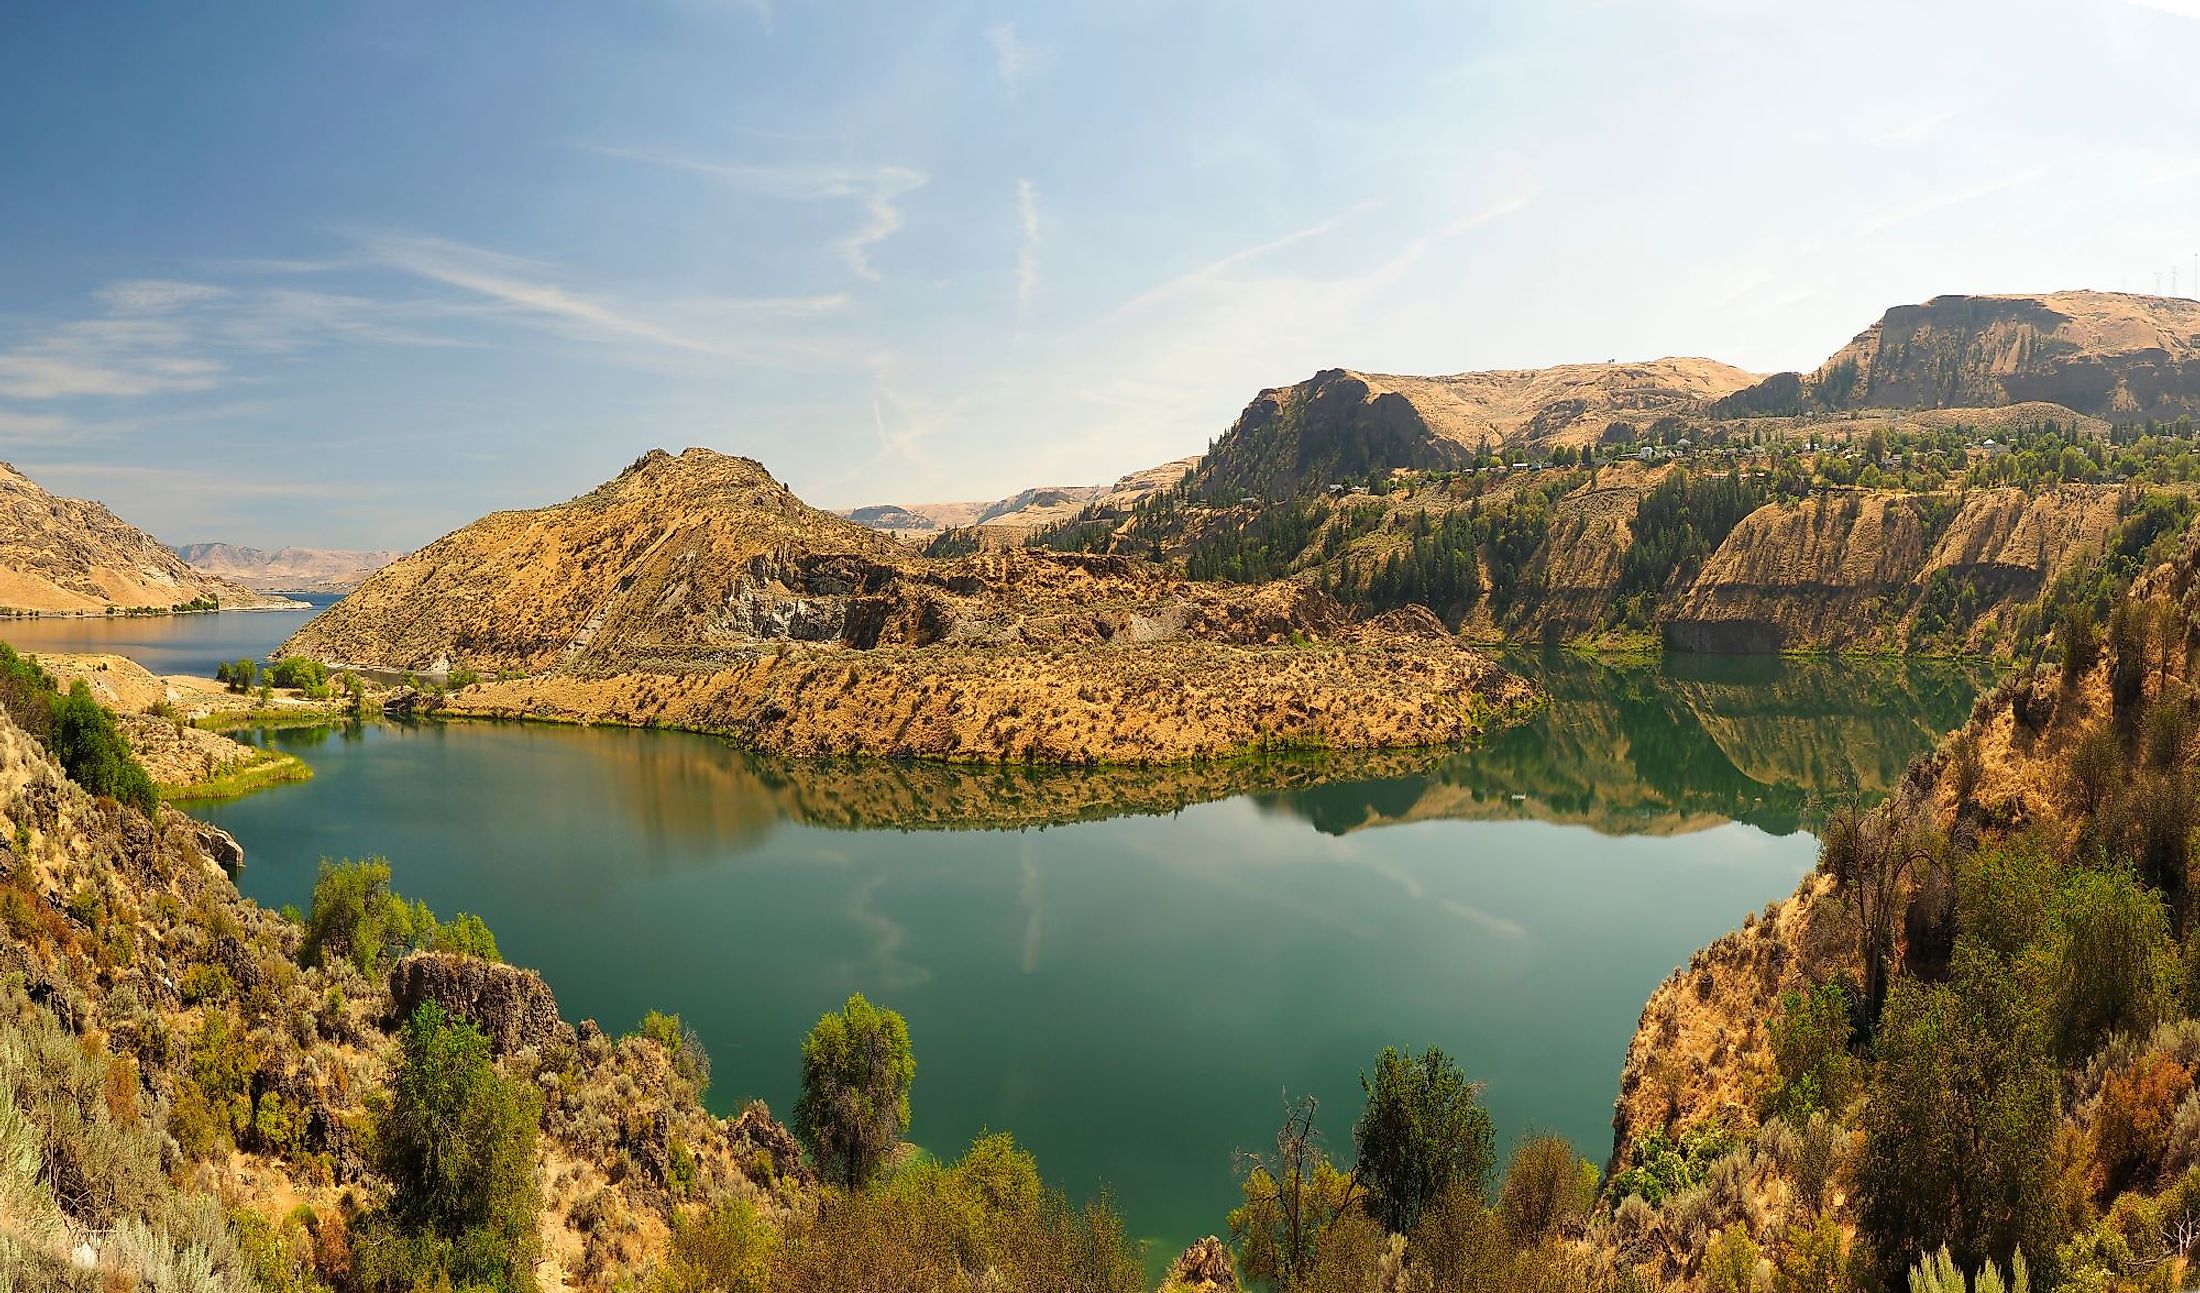 Panorama of Roosevelt Lake created by the Grand Coulee Dam in the US state of Washington.